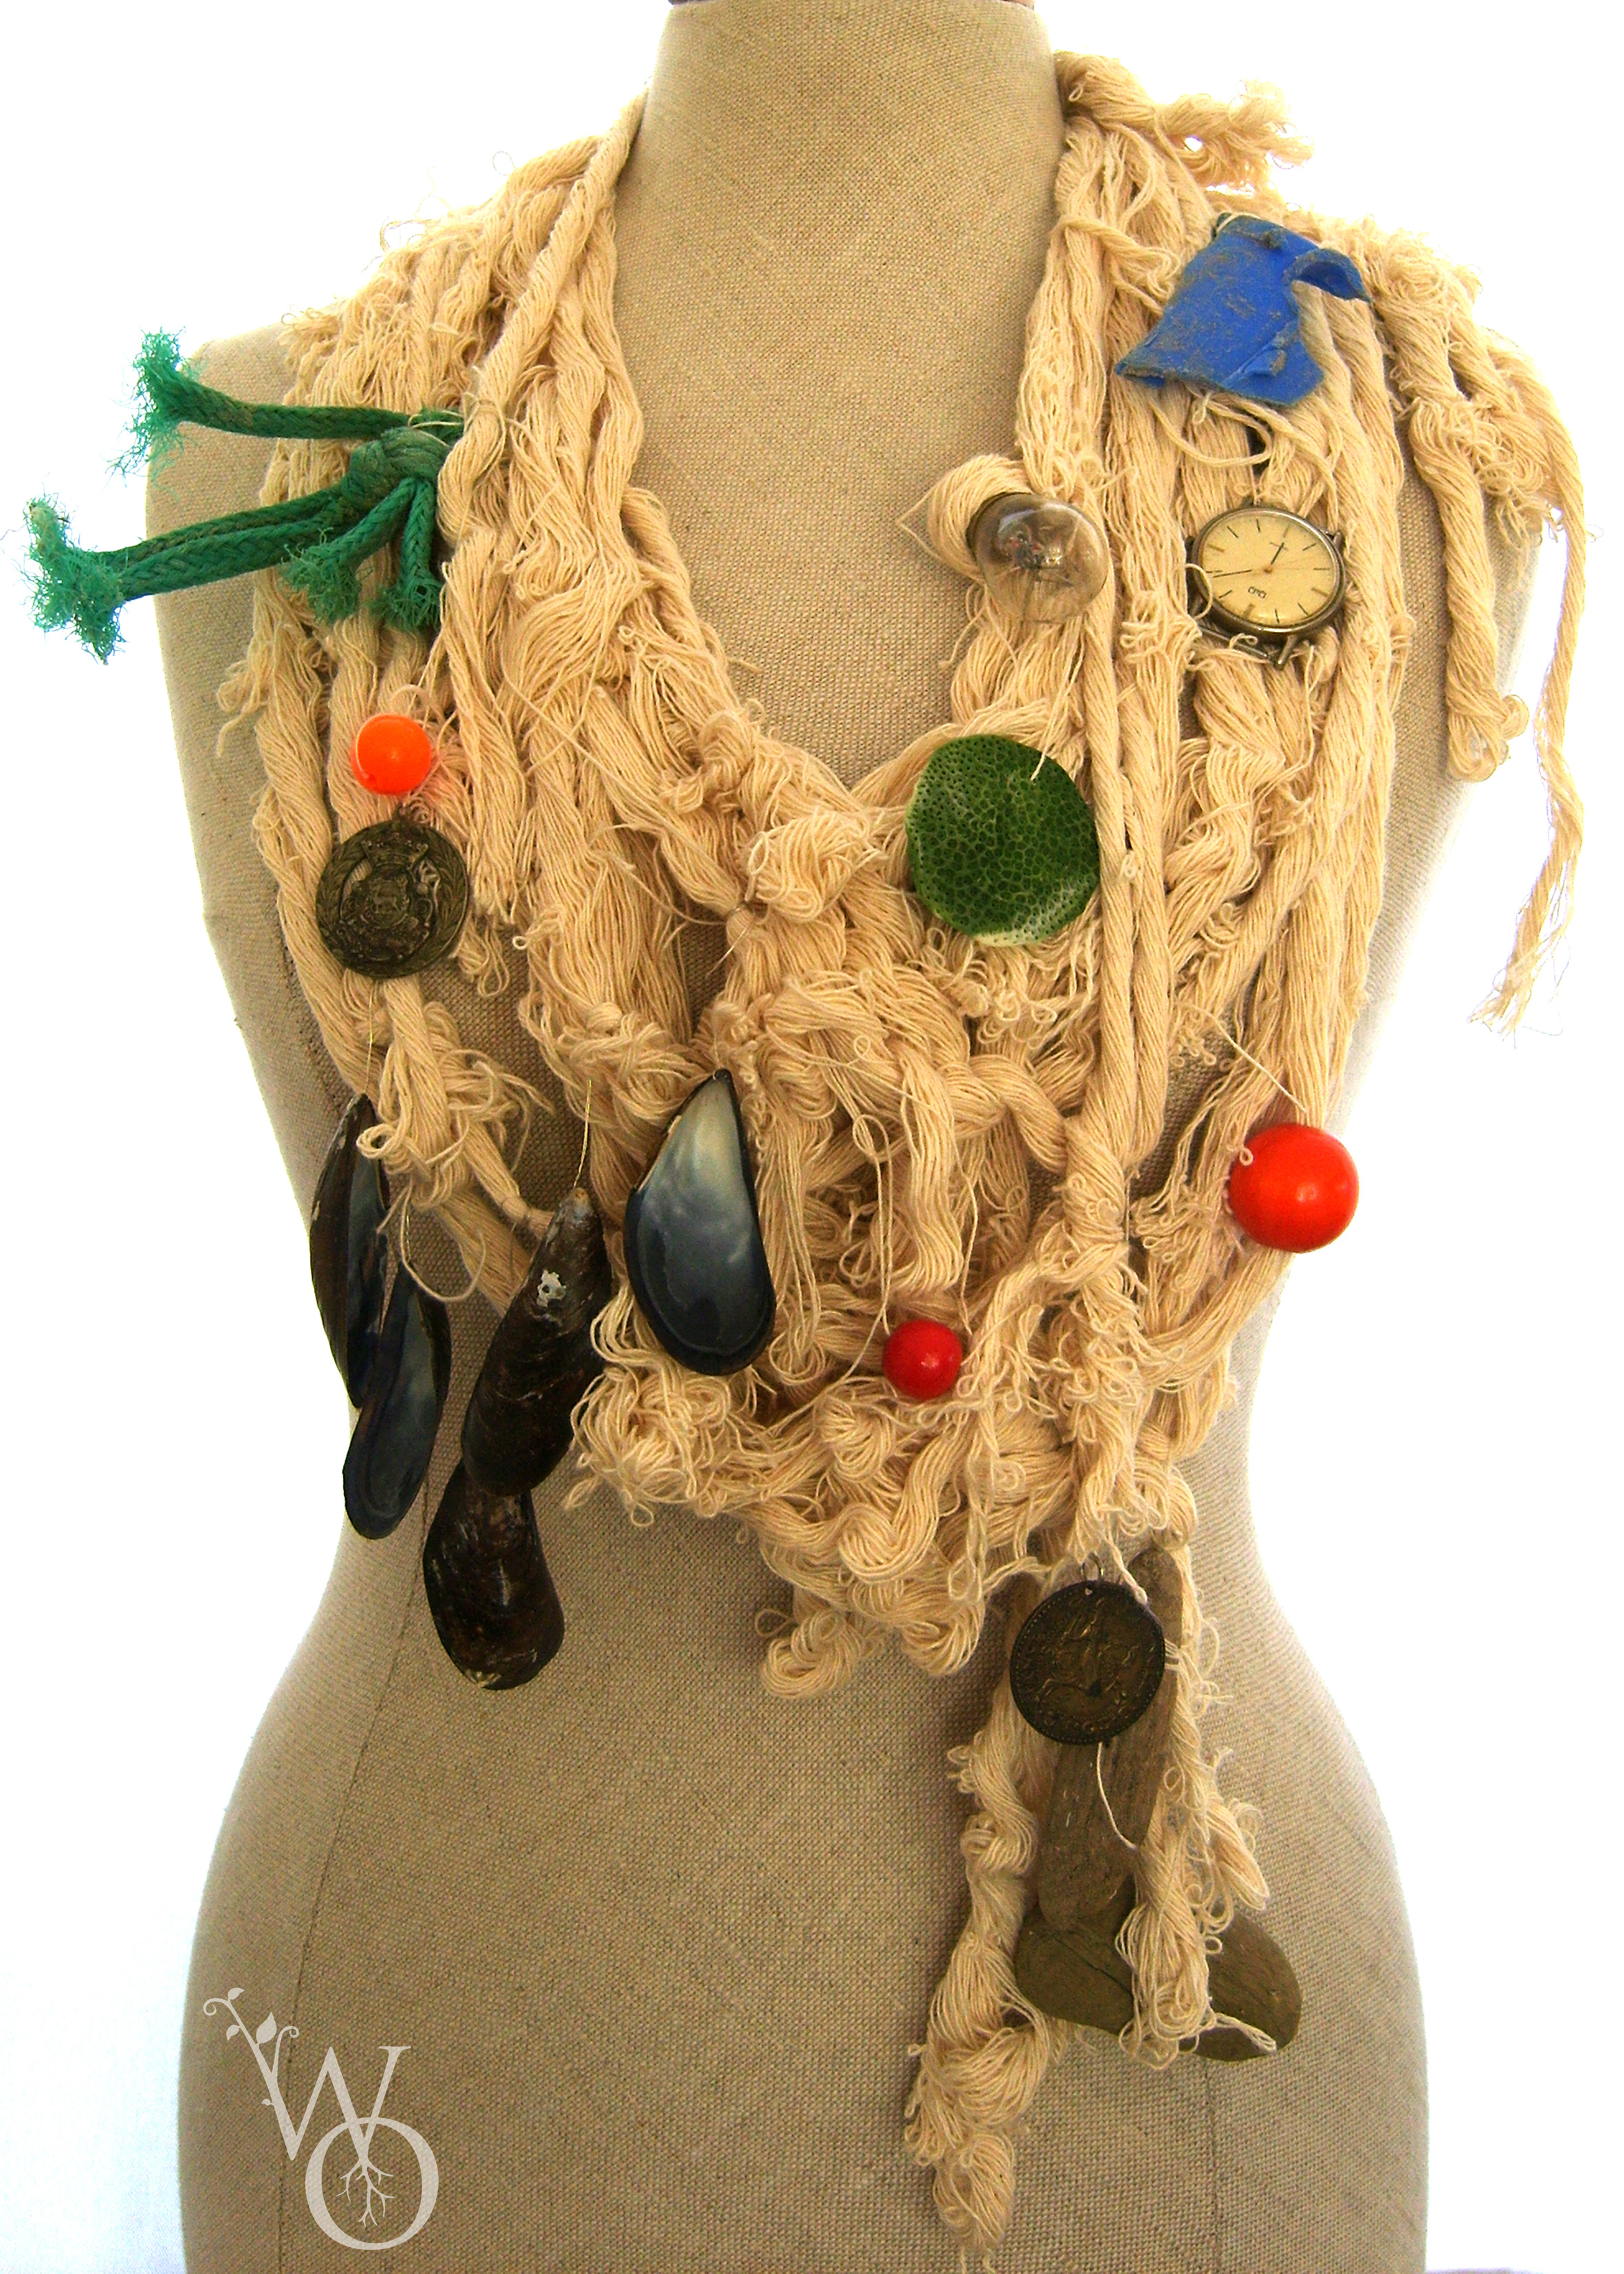 Necklace made from rope and various items natural and man made from the sea, watch parts.